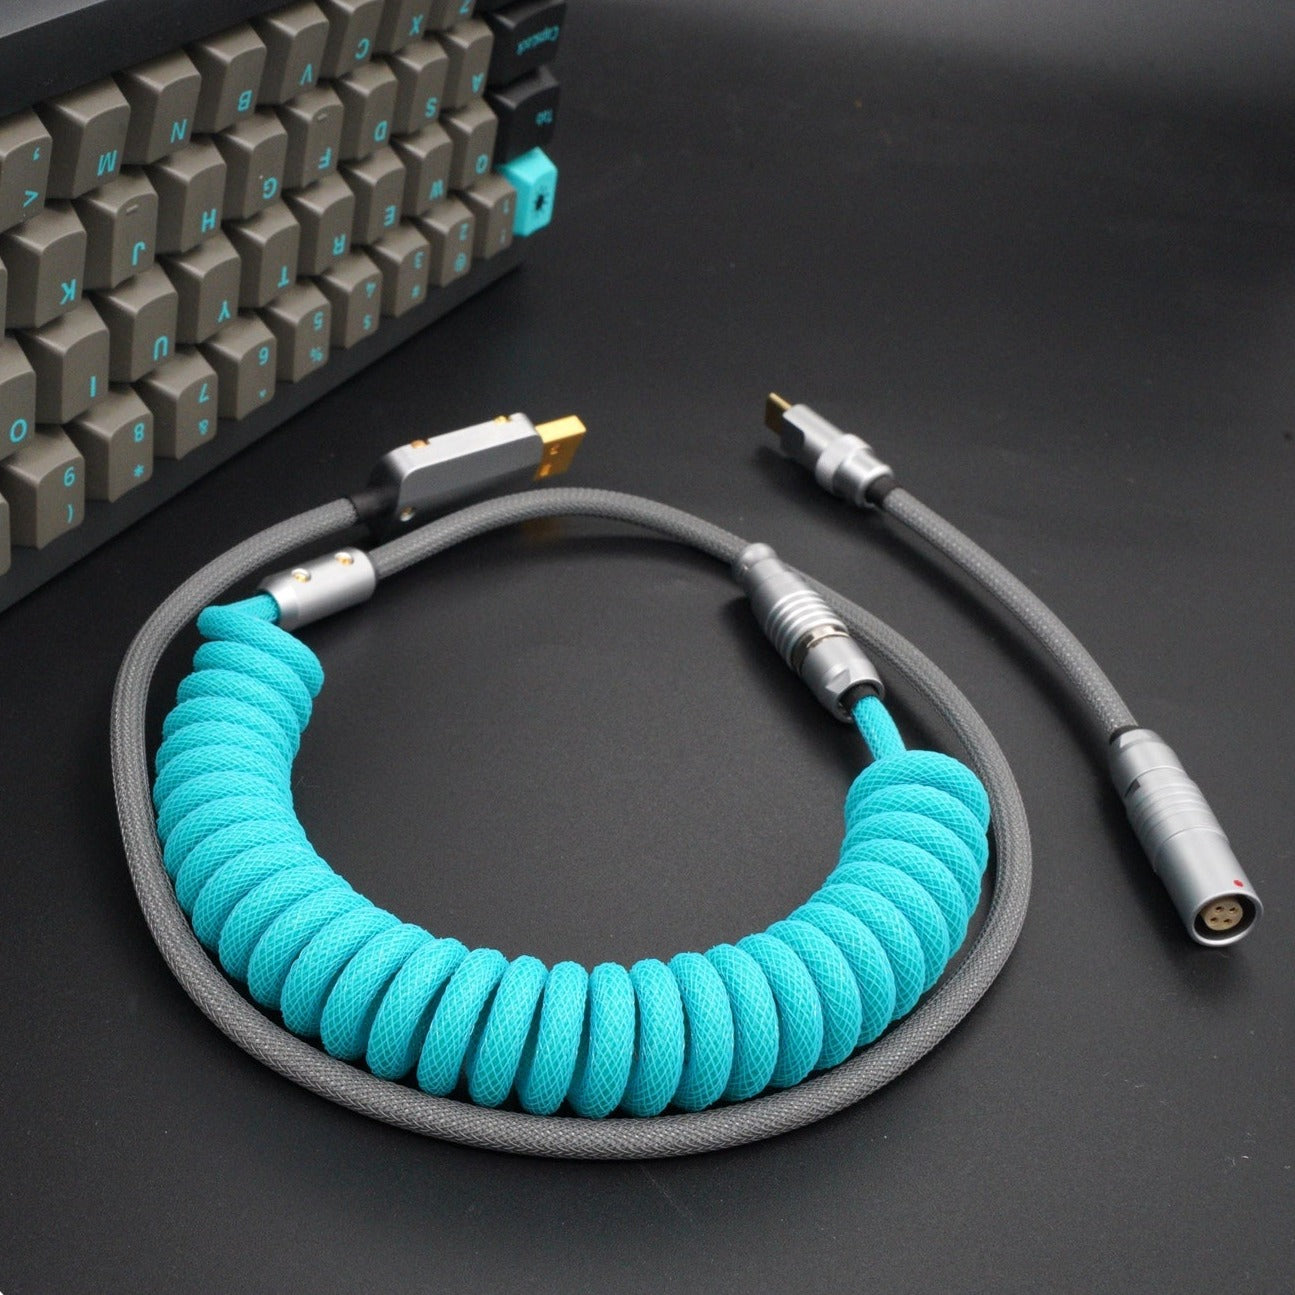 Sleeved Coiled Keyboard Aviator Cable, Lemo Style Connector - Teal /Grey